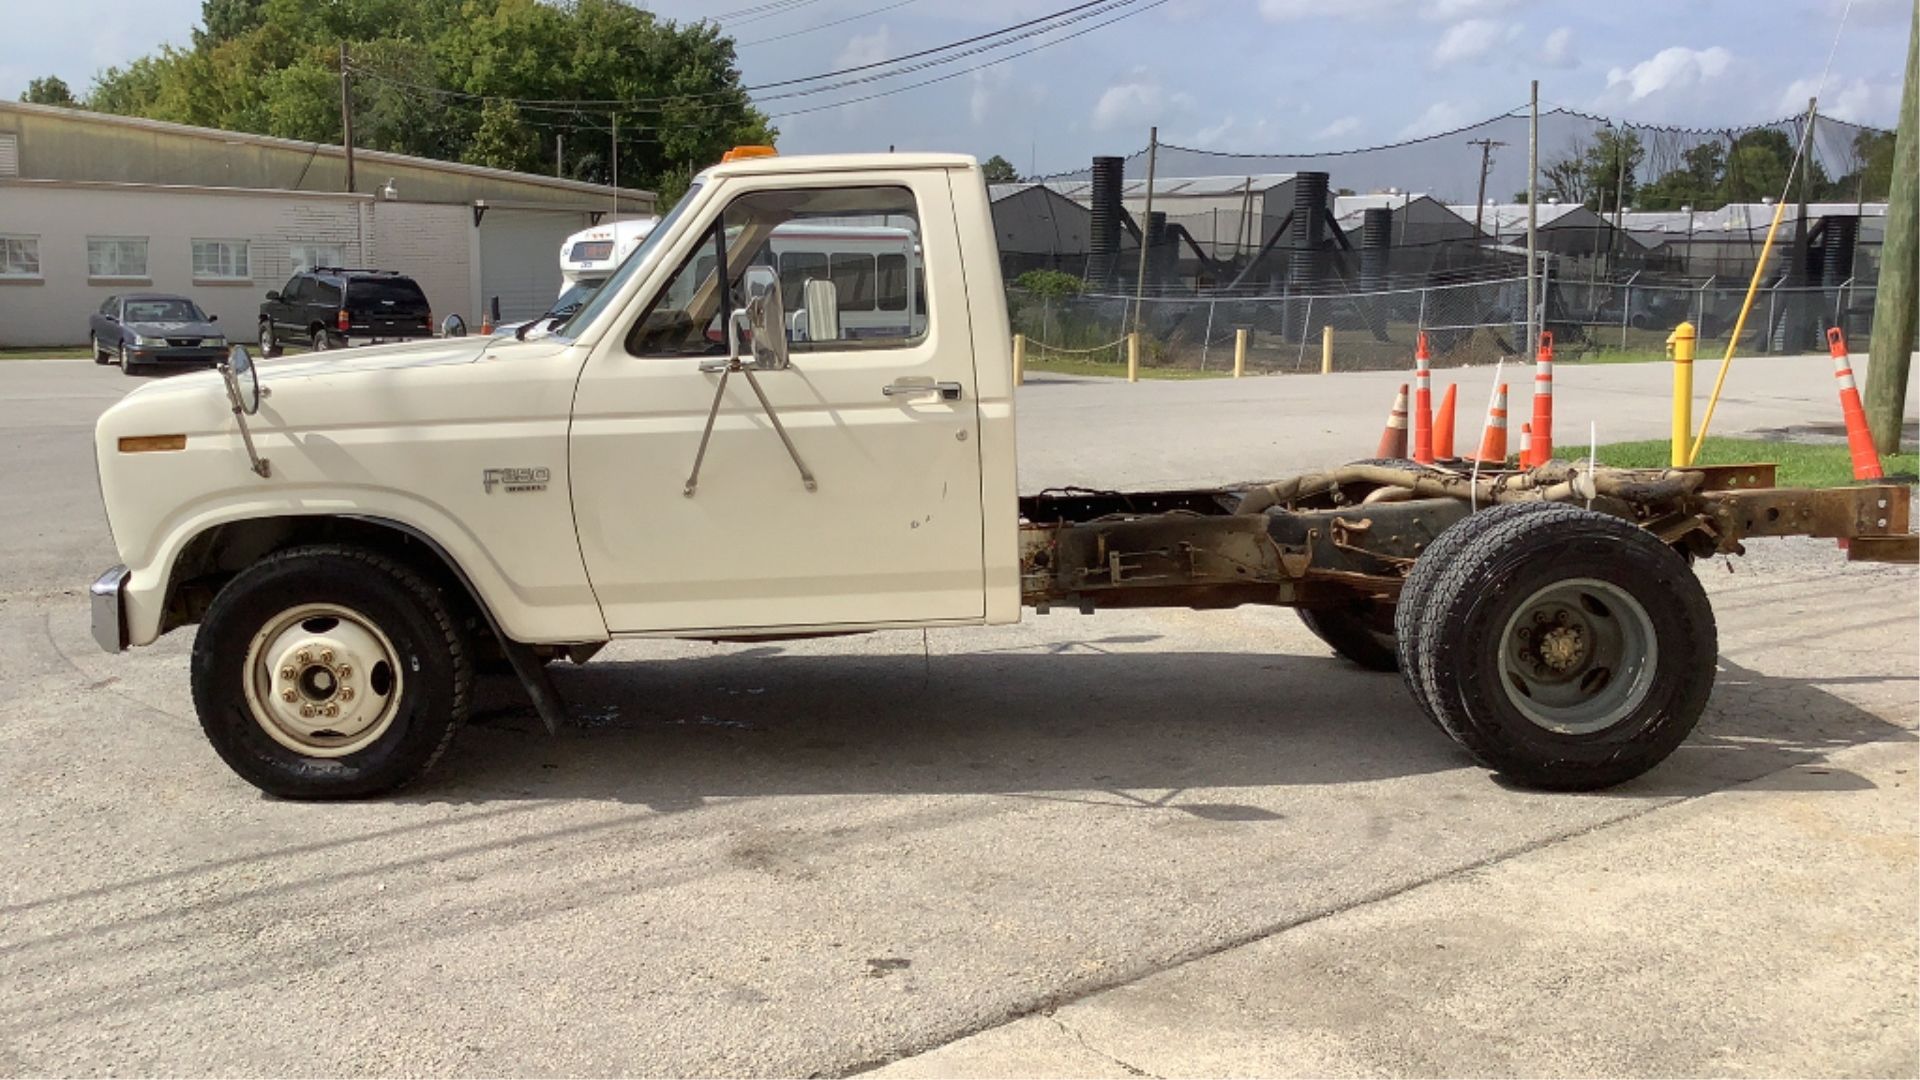 1985 Ford F-350 Regular Cab Chassis Truck 2WD - Image 11 of 83